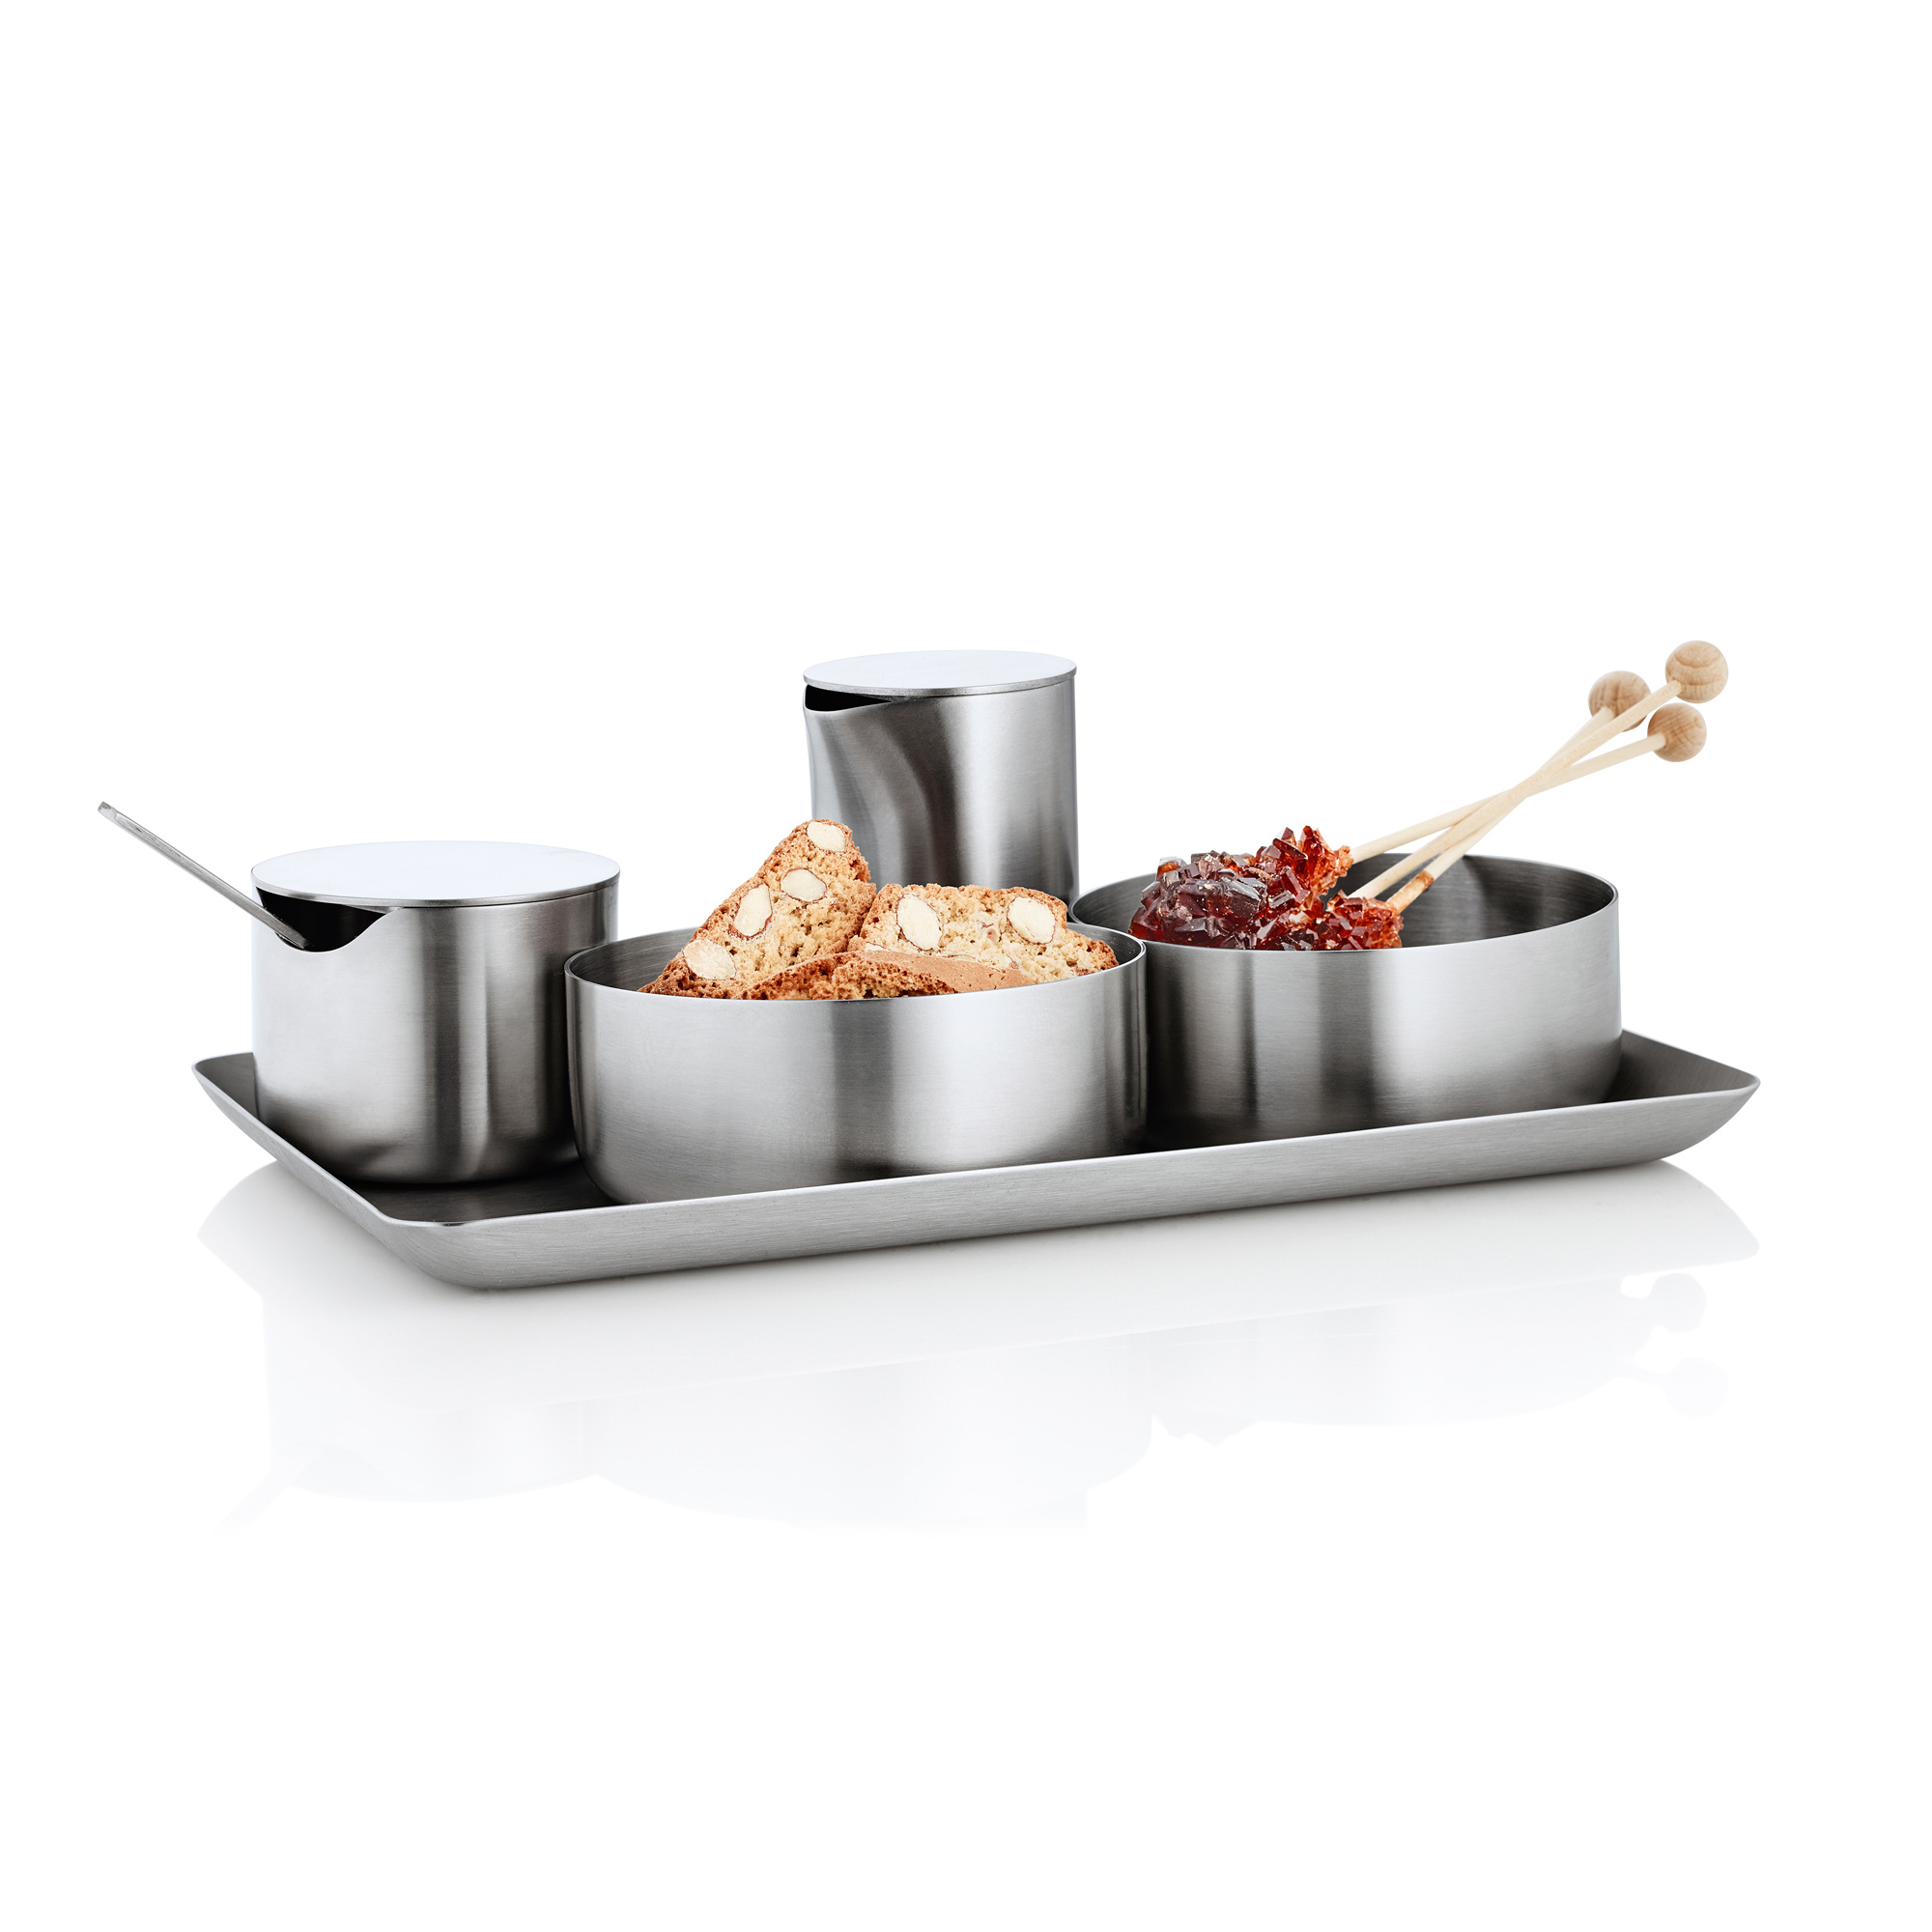 Basic Sugar Bowl with Stainless Steel Lid by Blomus Stainless Steel 